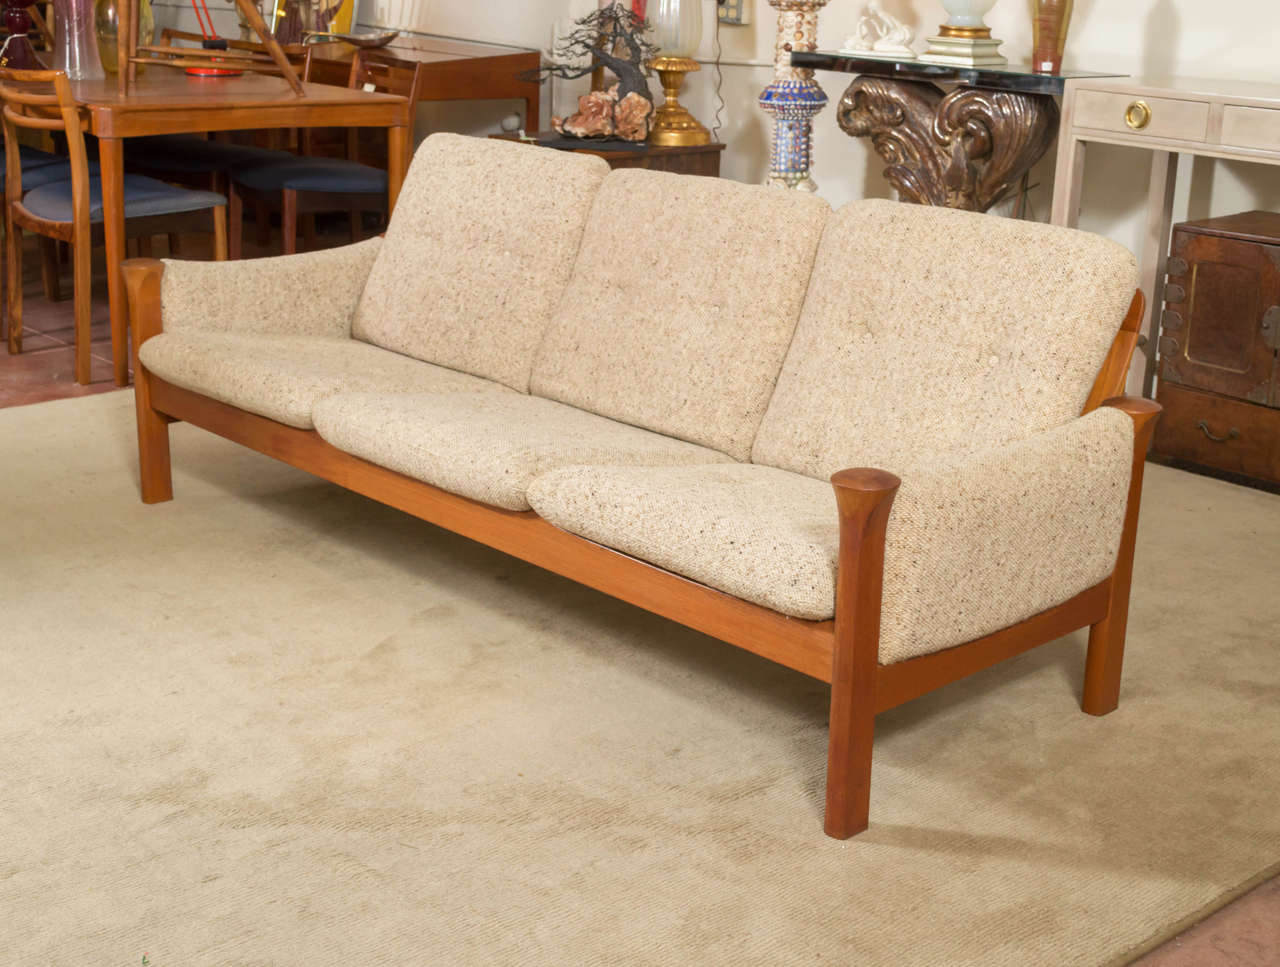 A circa 1970s Teak framed sofa, a Arne Vodder design for Cado. Set of six cushions, and arm padding in a Oatmeal color Wool fabric. Seat cushions are over steel springs that are still in great condition.